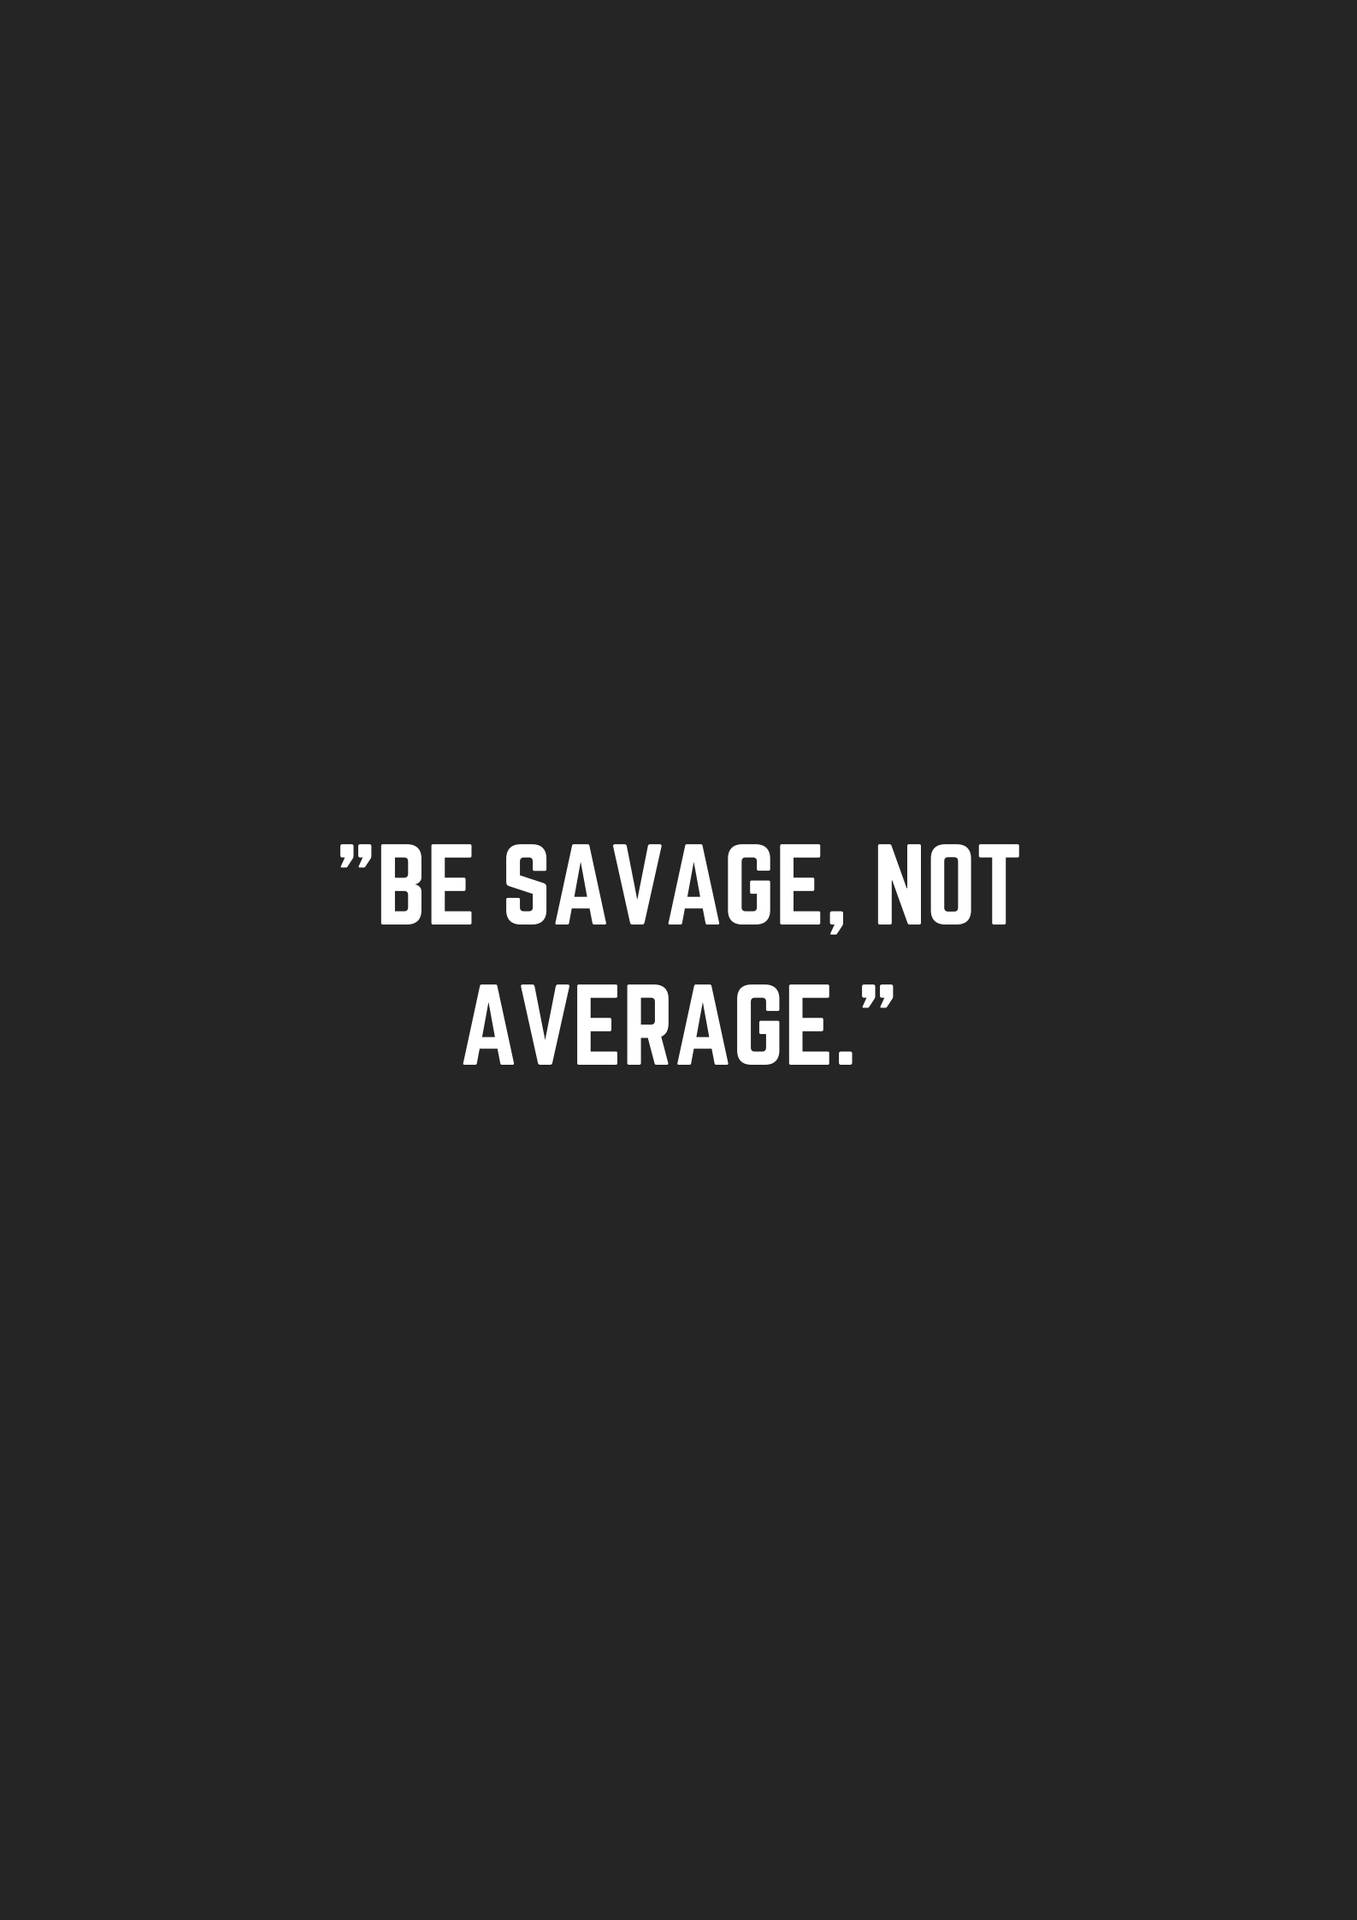 Download Unleash Your Inner Beast: Inspirational Savage Quote Wallpaper